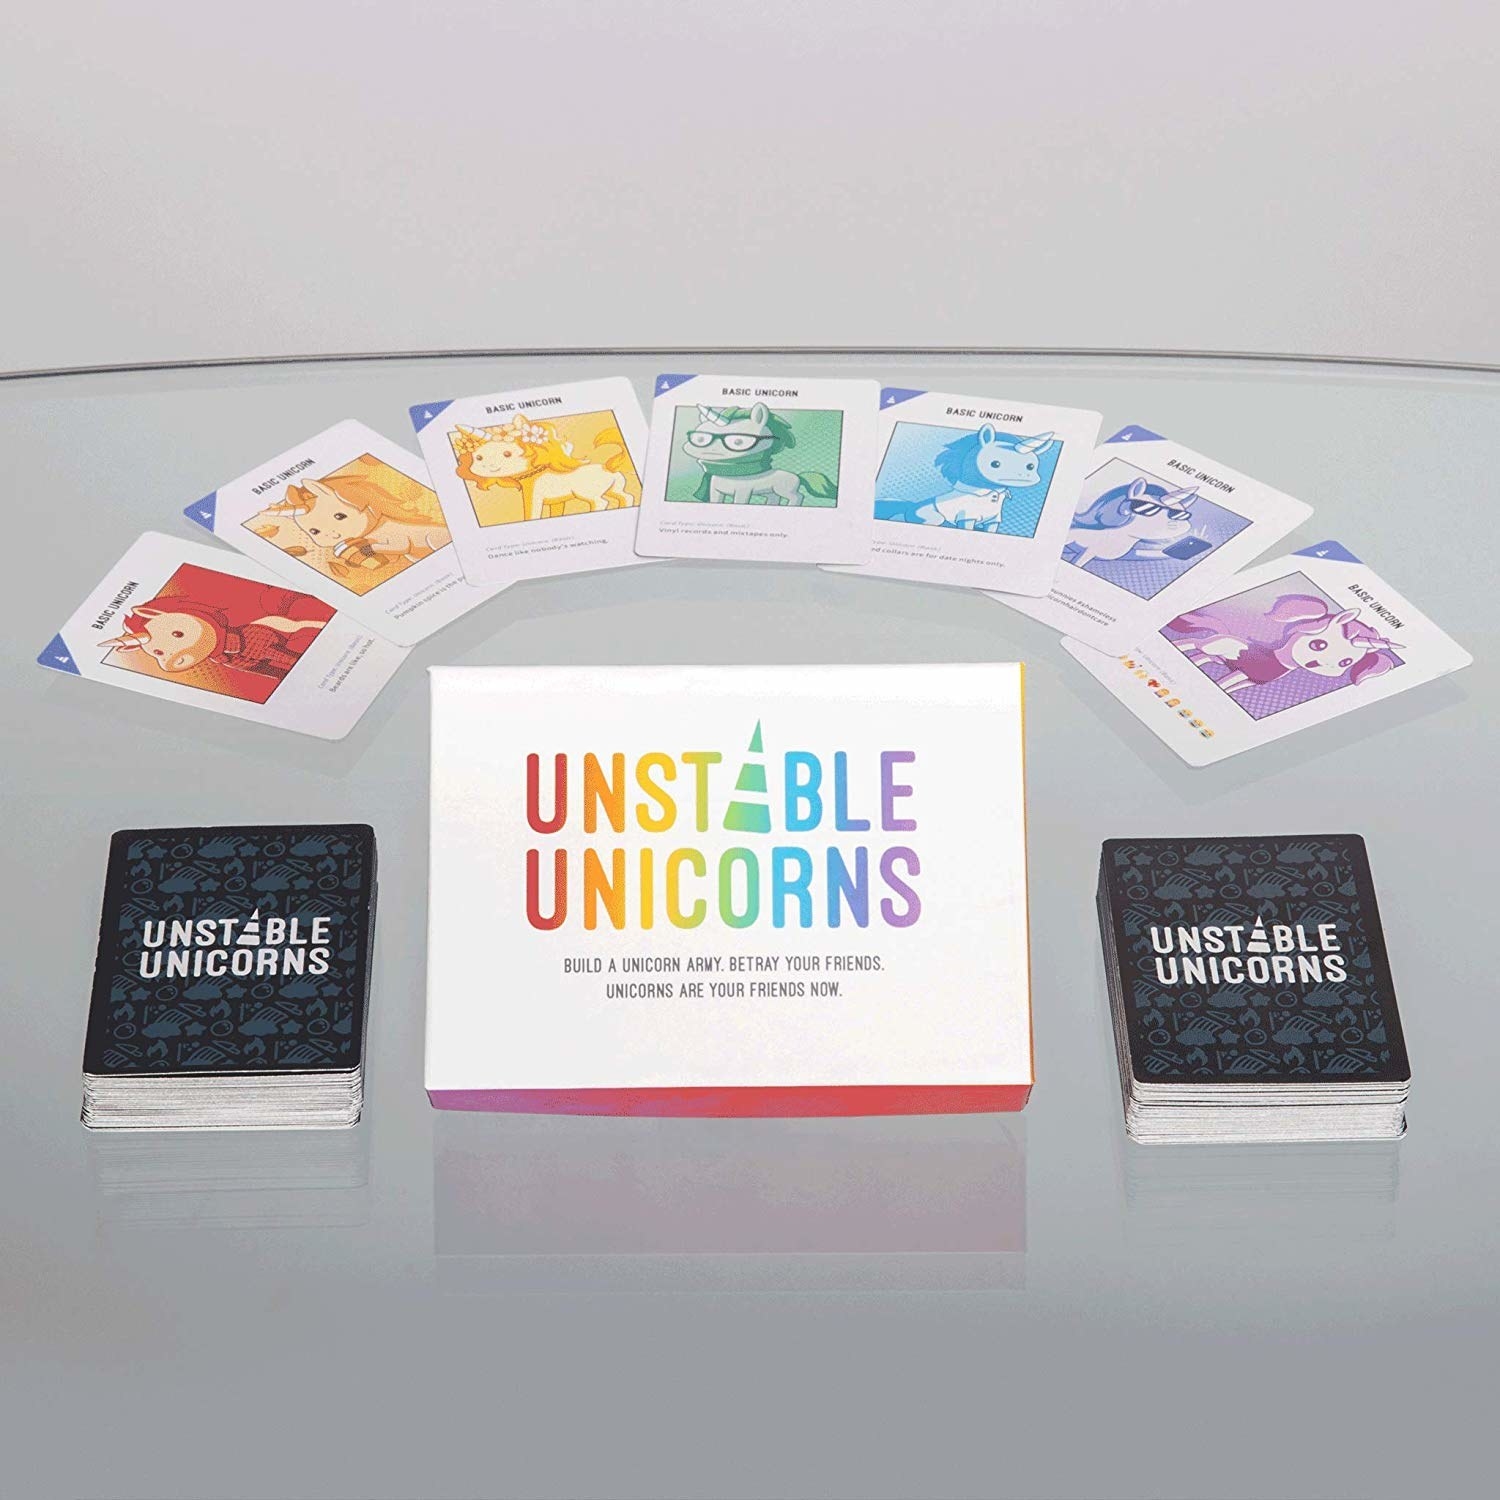 The Unstable Unicorns cards